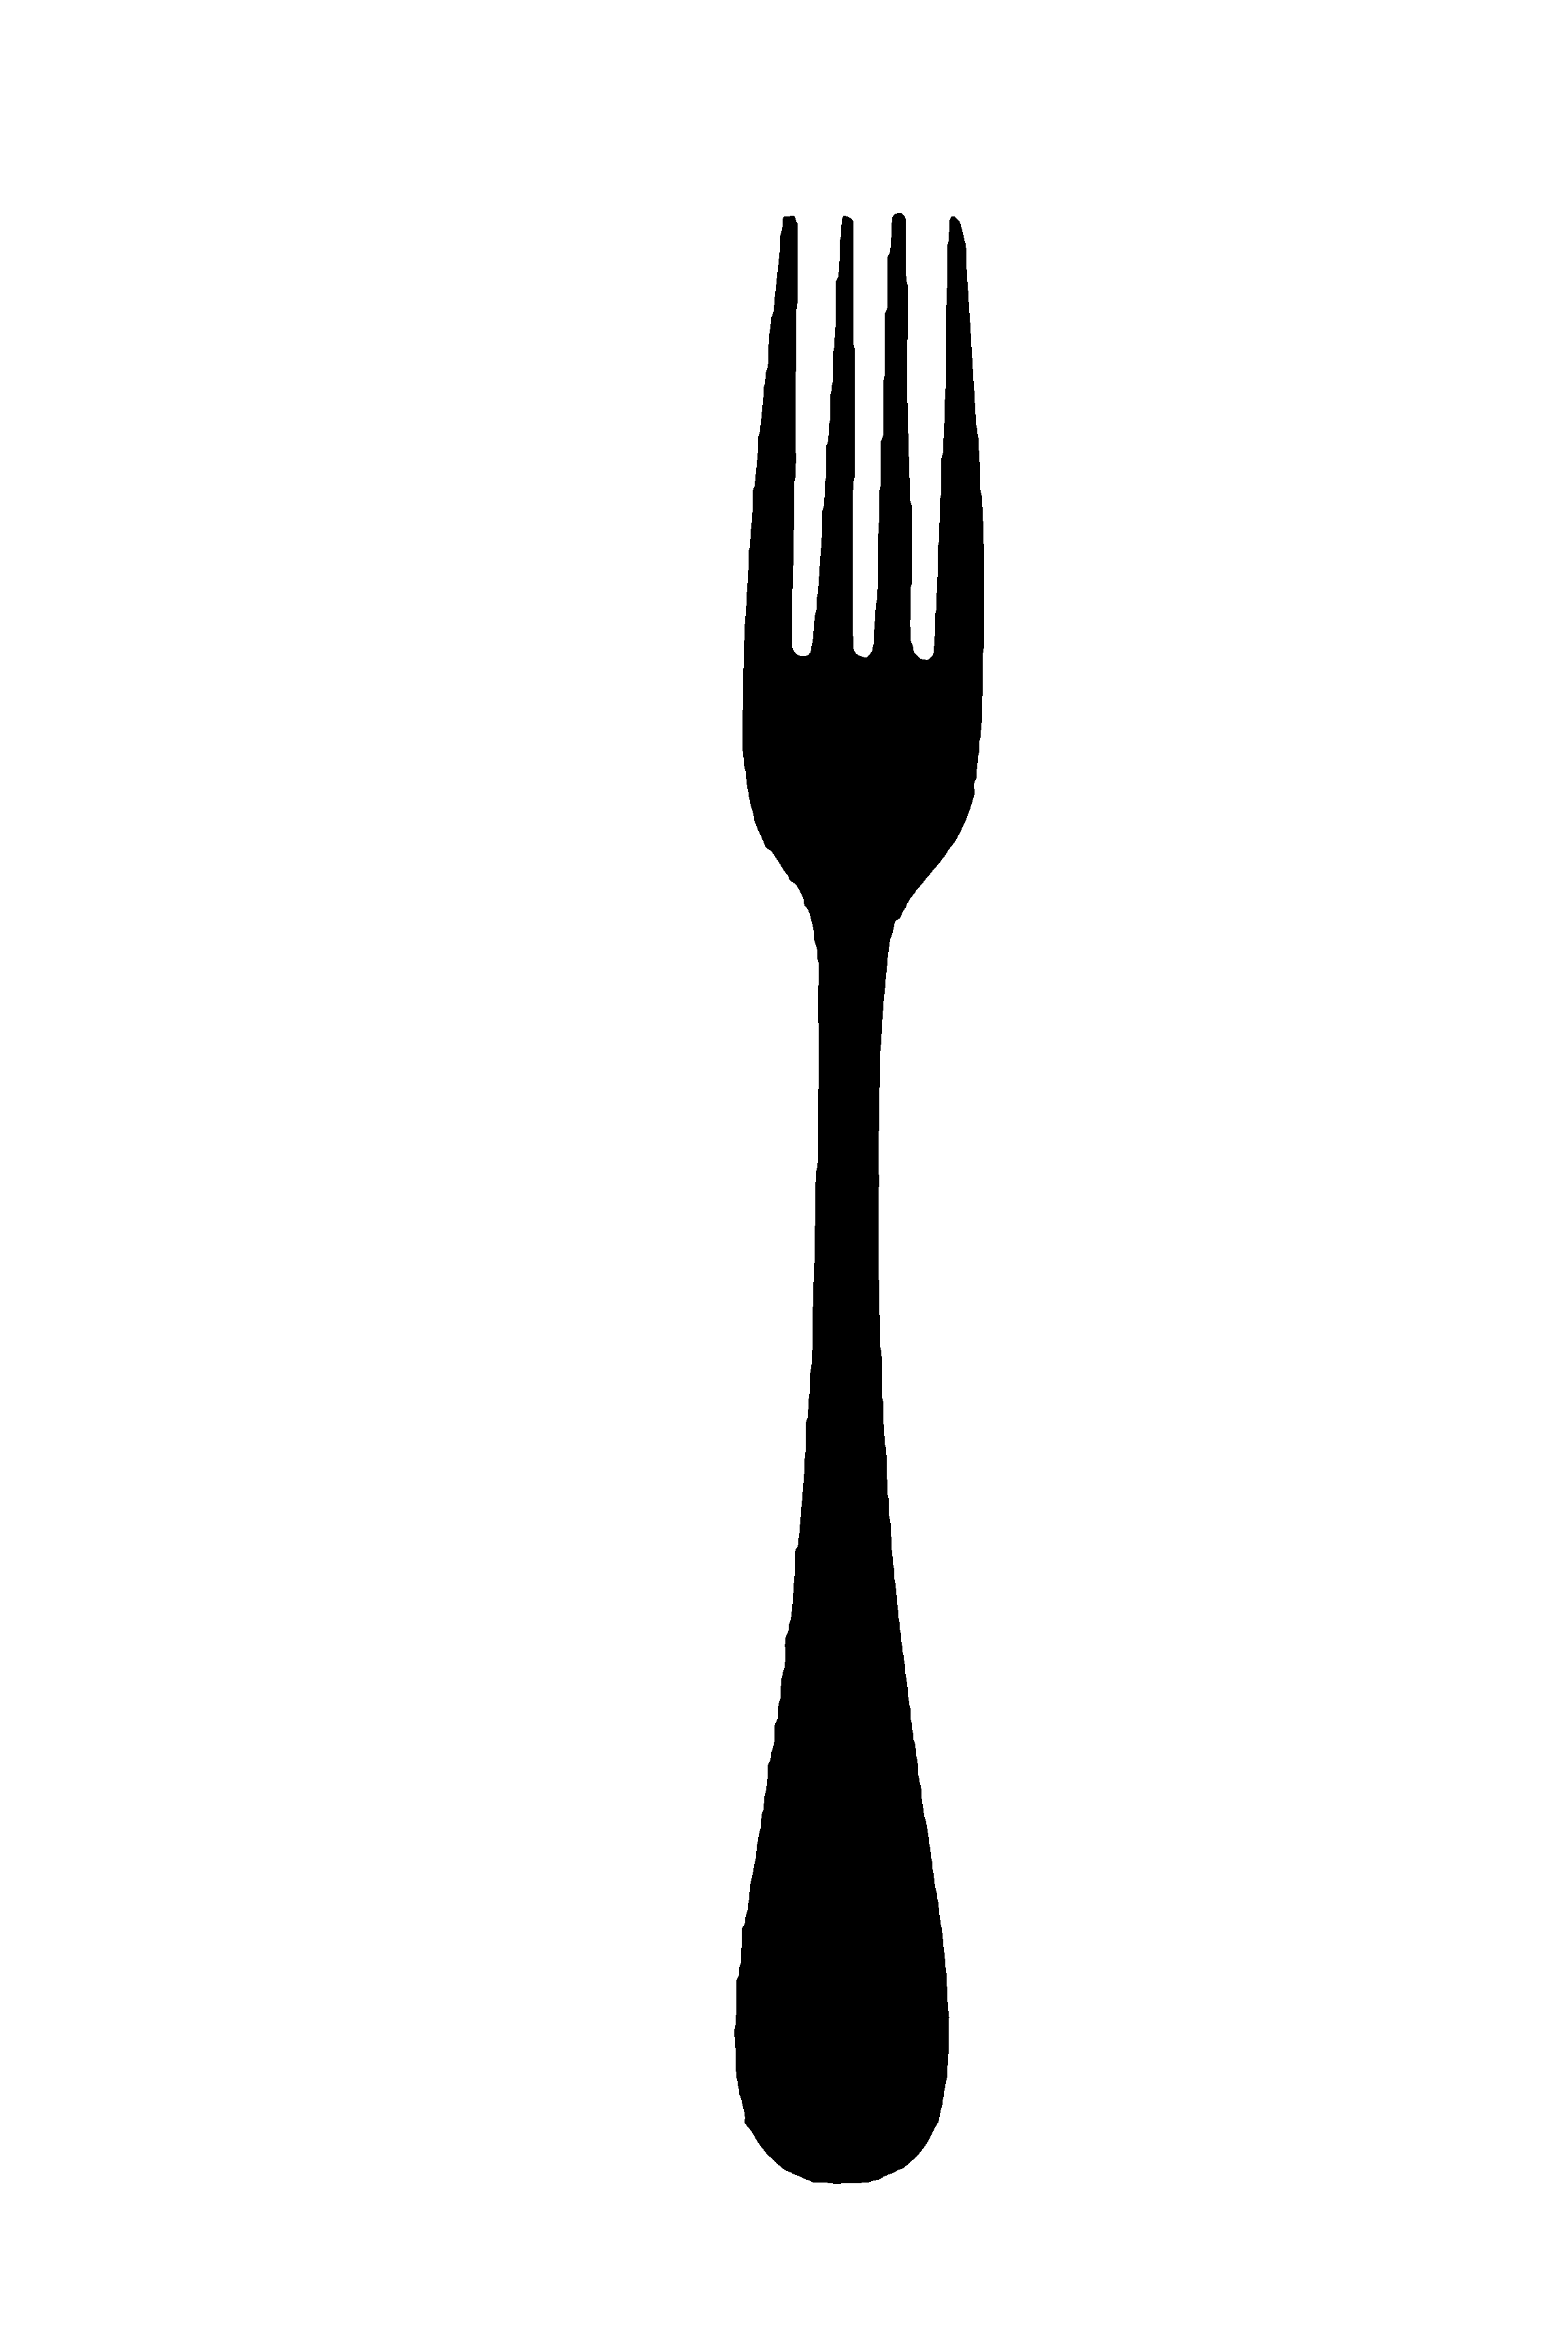 Includes 1 knife, 1 fork, and